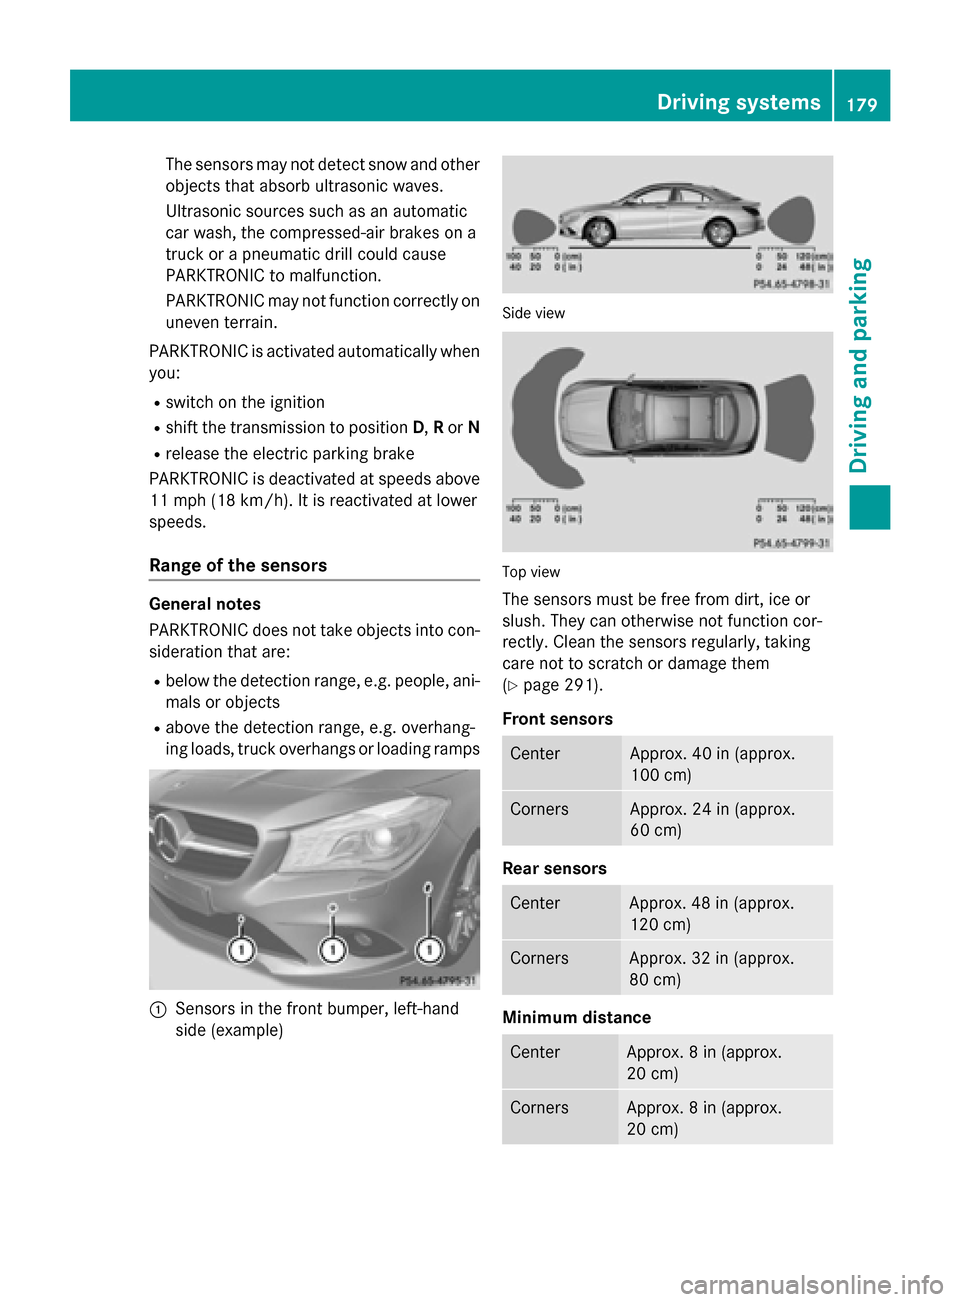 MERCEDES-BENZ CLA-Class 2014 C117 Owners Manual The sensors may not detect snow and other
objects that absorb ultrasonic waves.
Ultrasonic sources such as an automatic
car wash, the compressed-air brakes on a
truck or a pneumatic drill could cause
